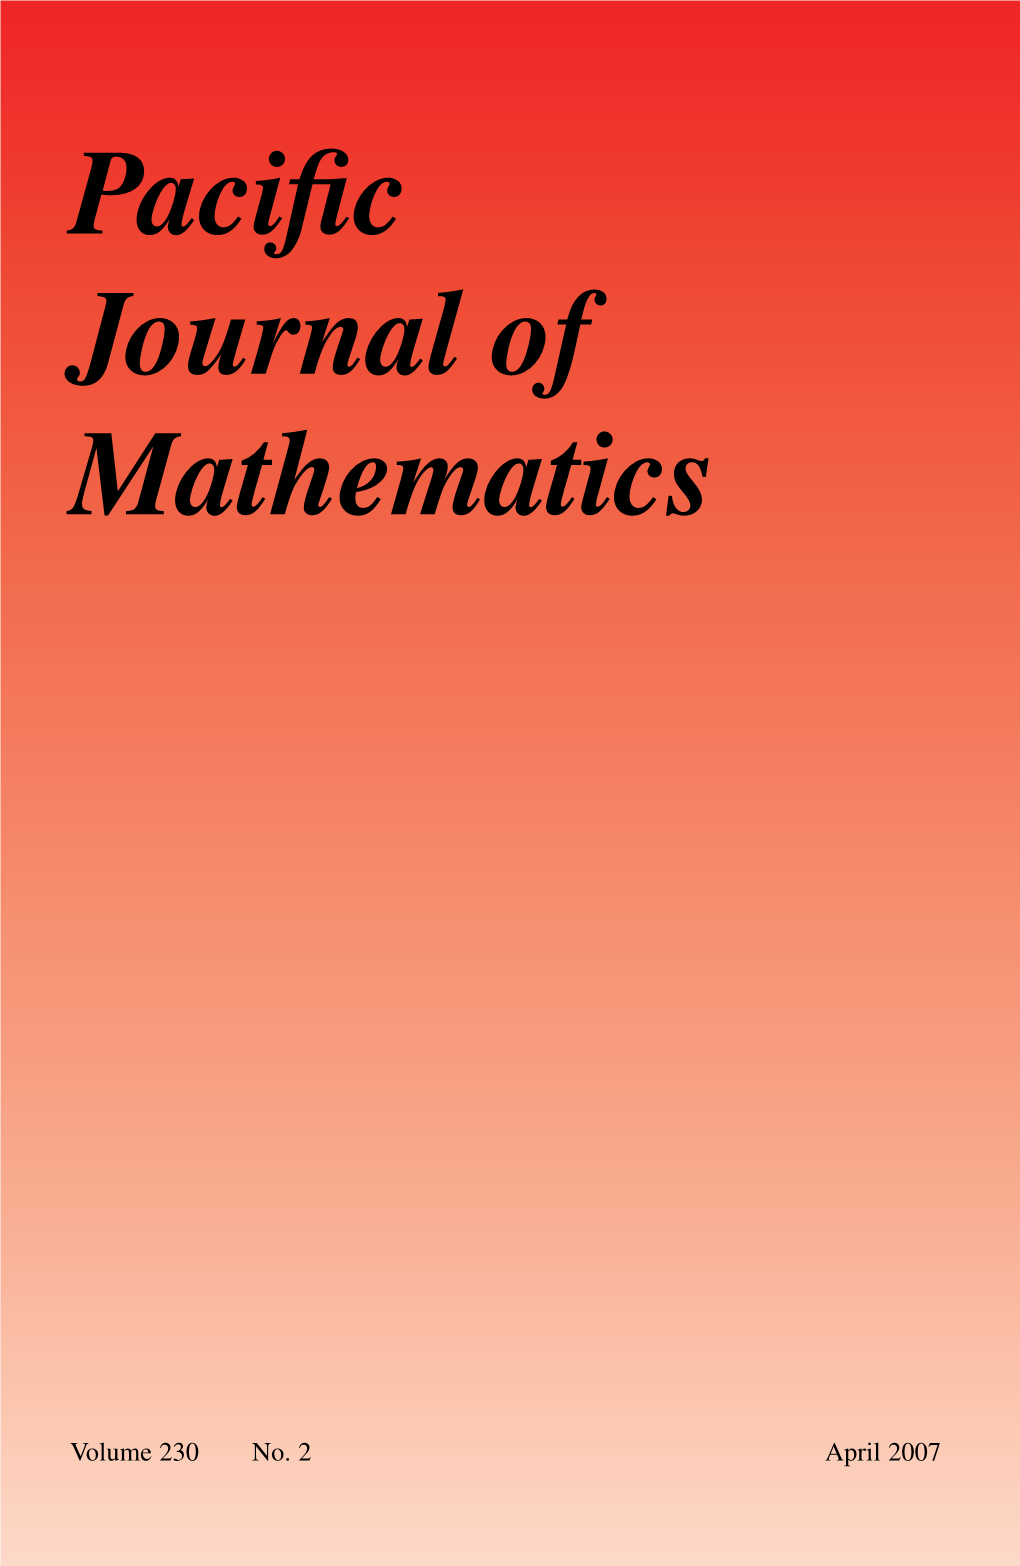 Pacific Journal of Mathematics Vol 230 Issue 2, Apr 2007